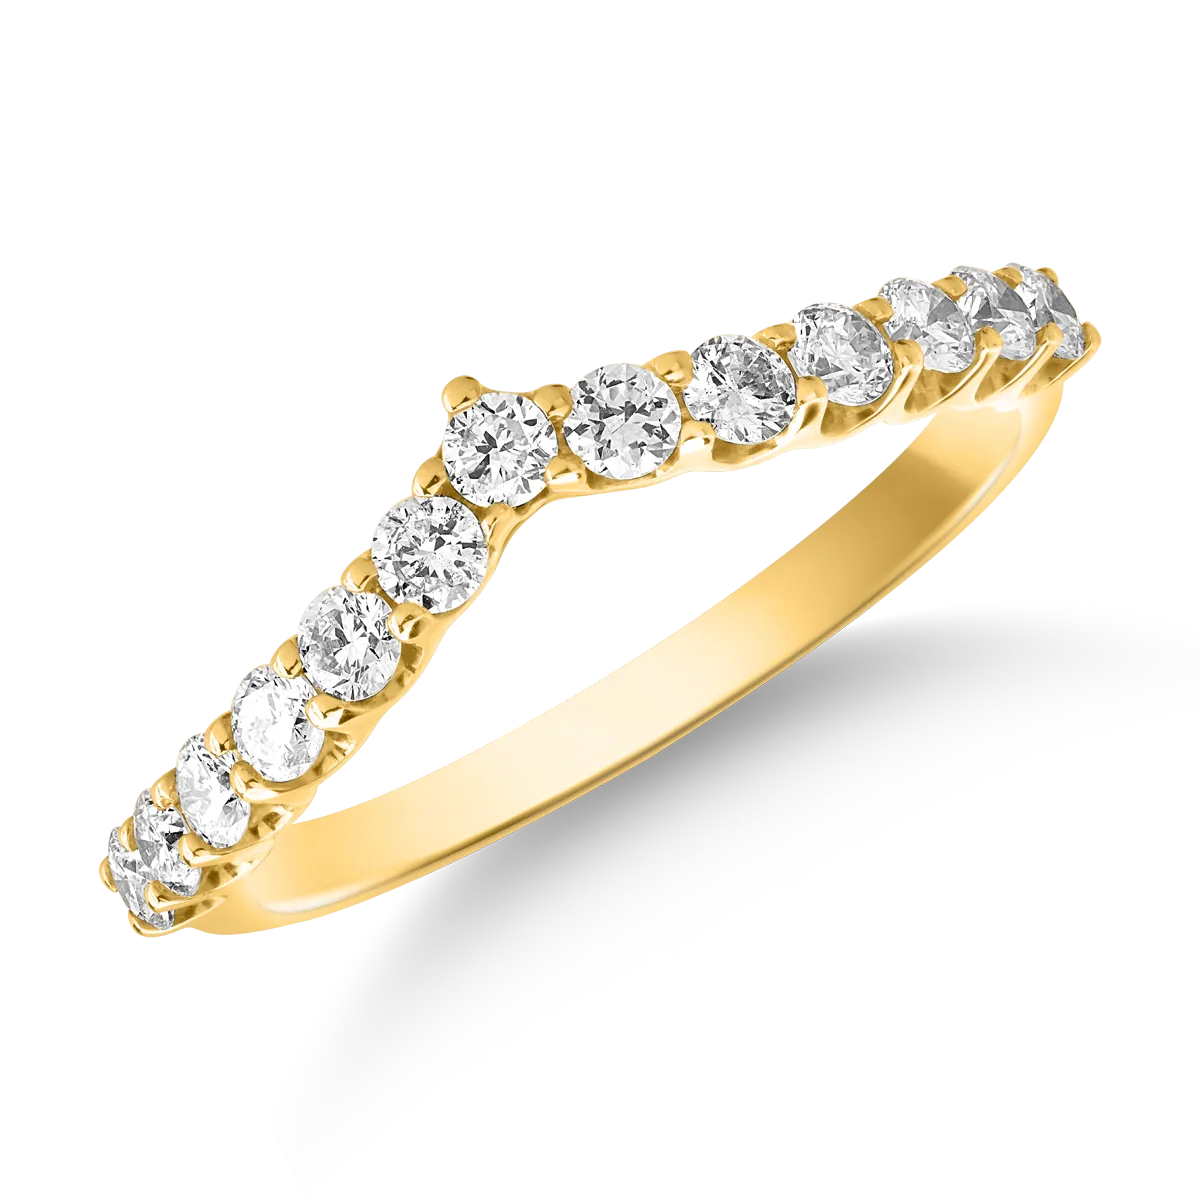 Half eternity ring in yellow gold with 0.5ct diamonds